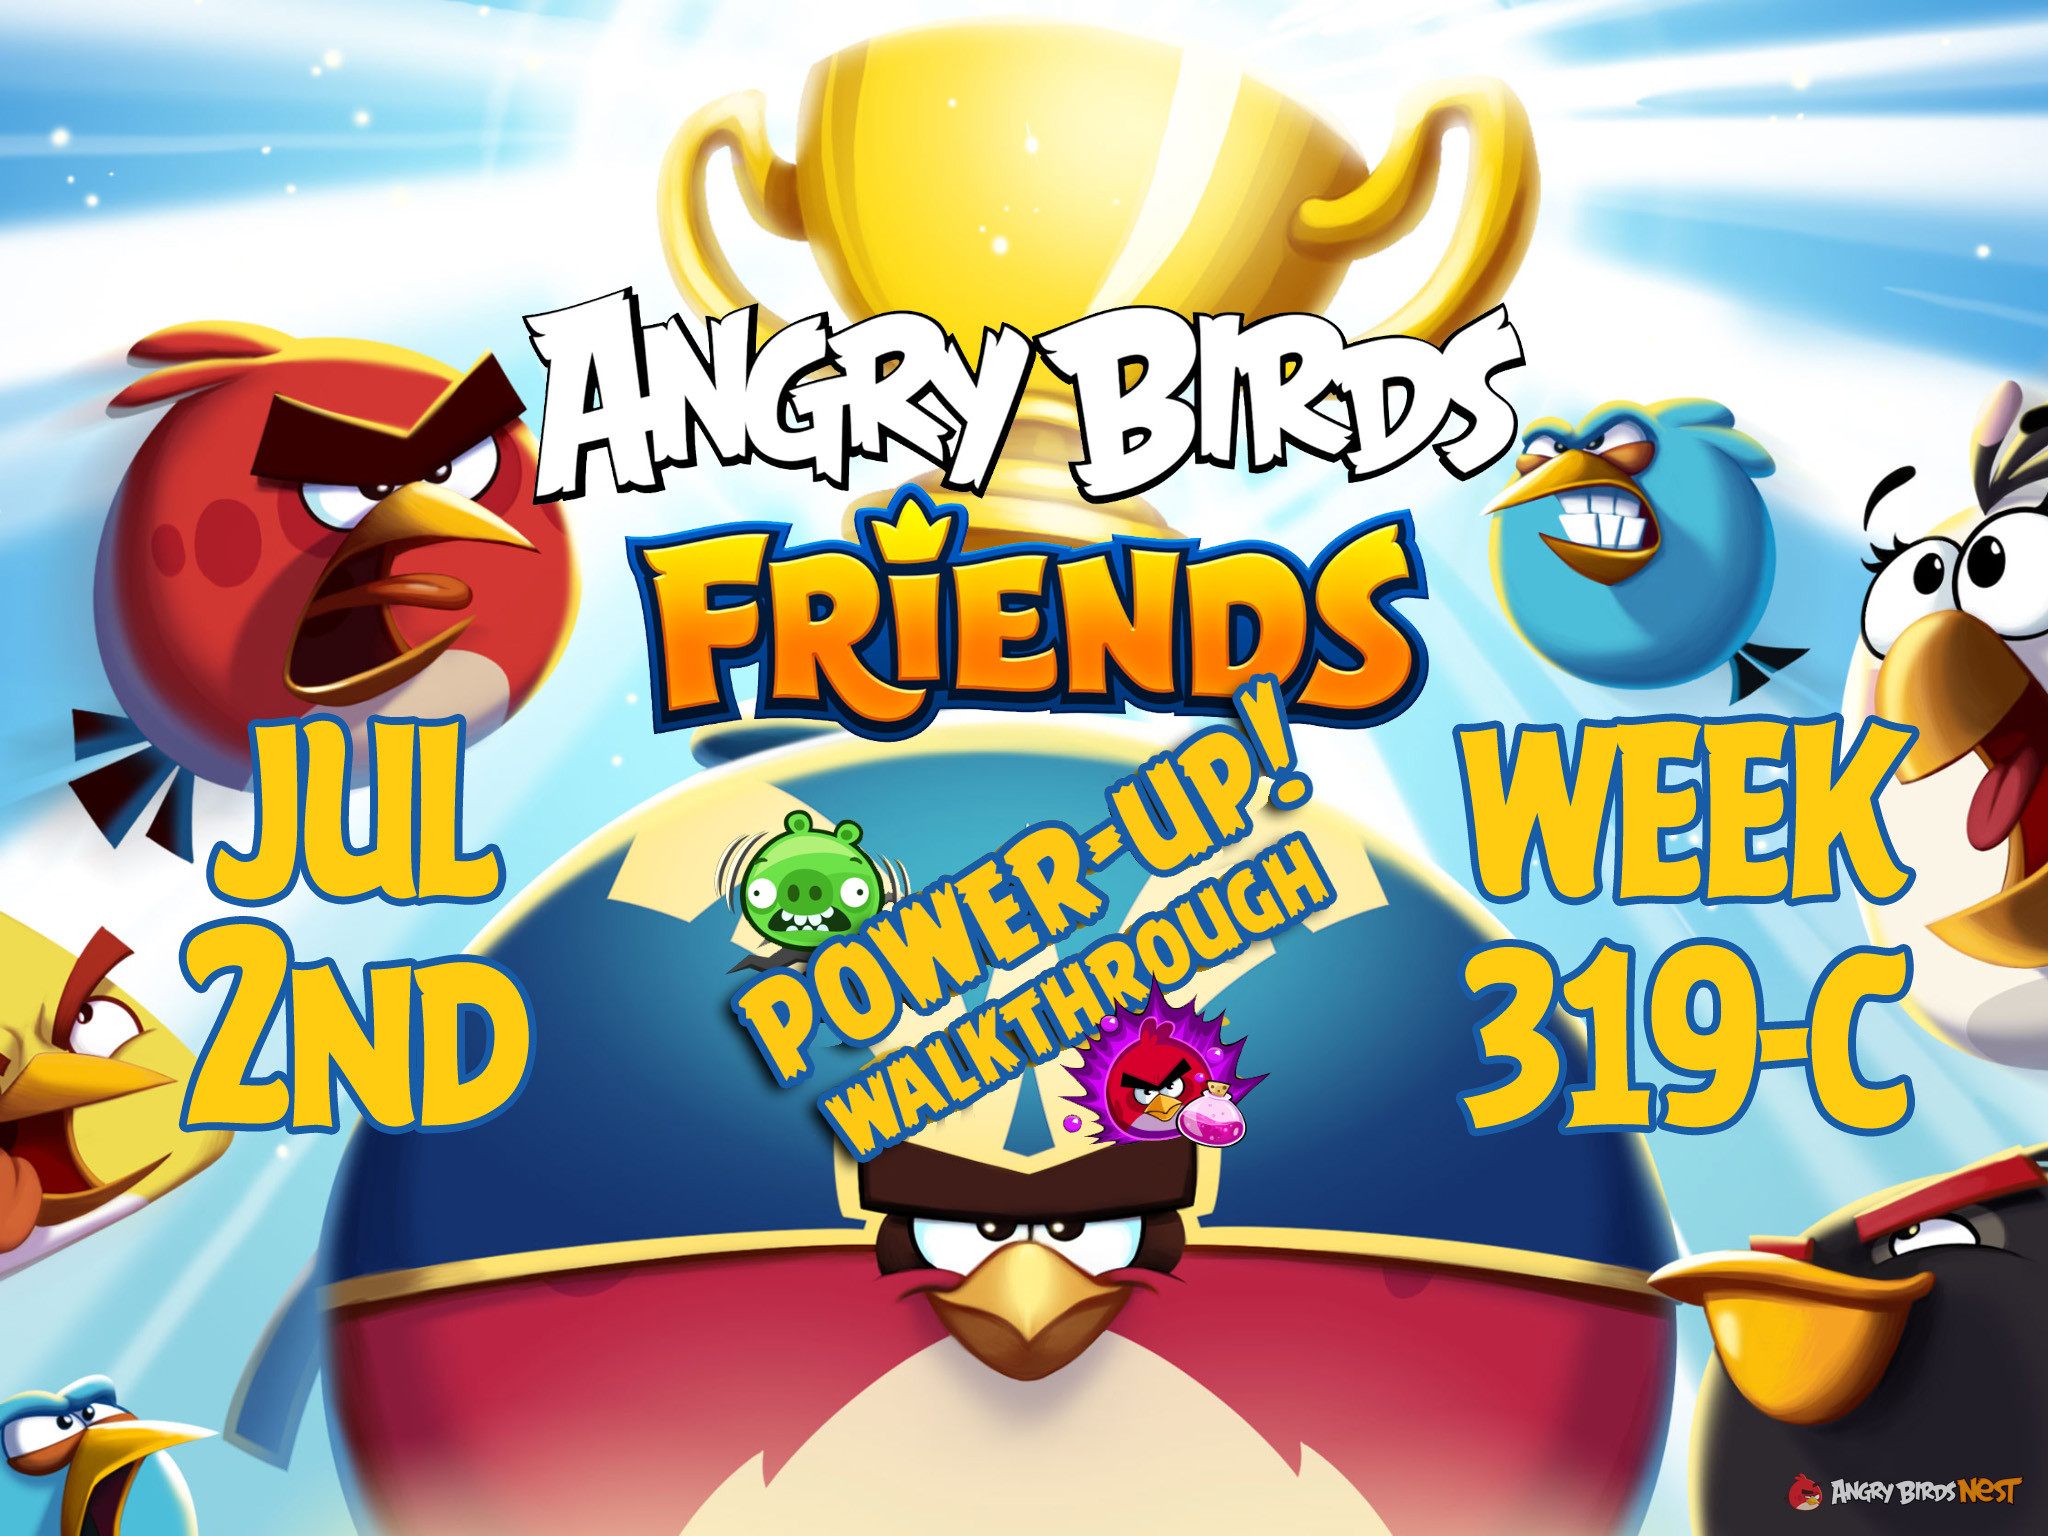 Angry-Birds-Friends-Tournament-Week-319-C-Feature-Image-PU